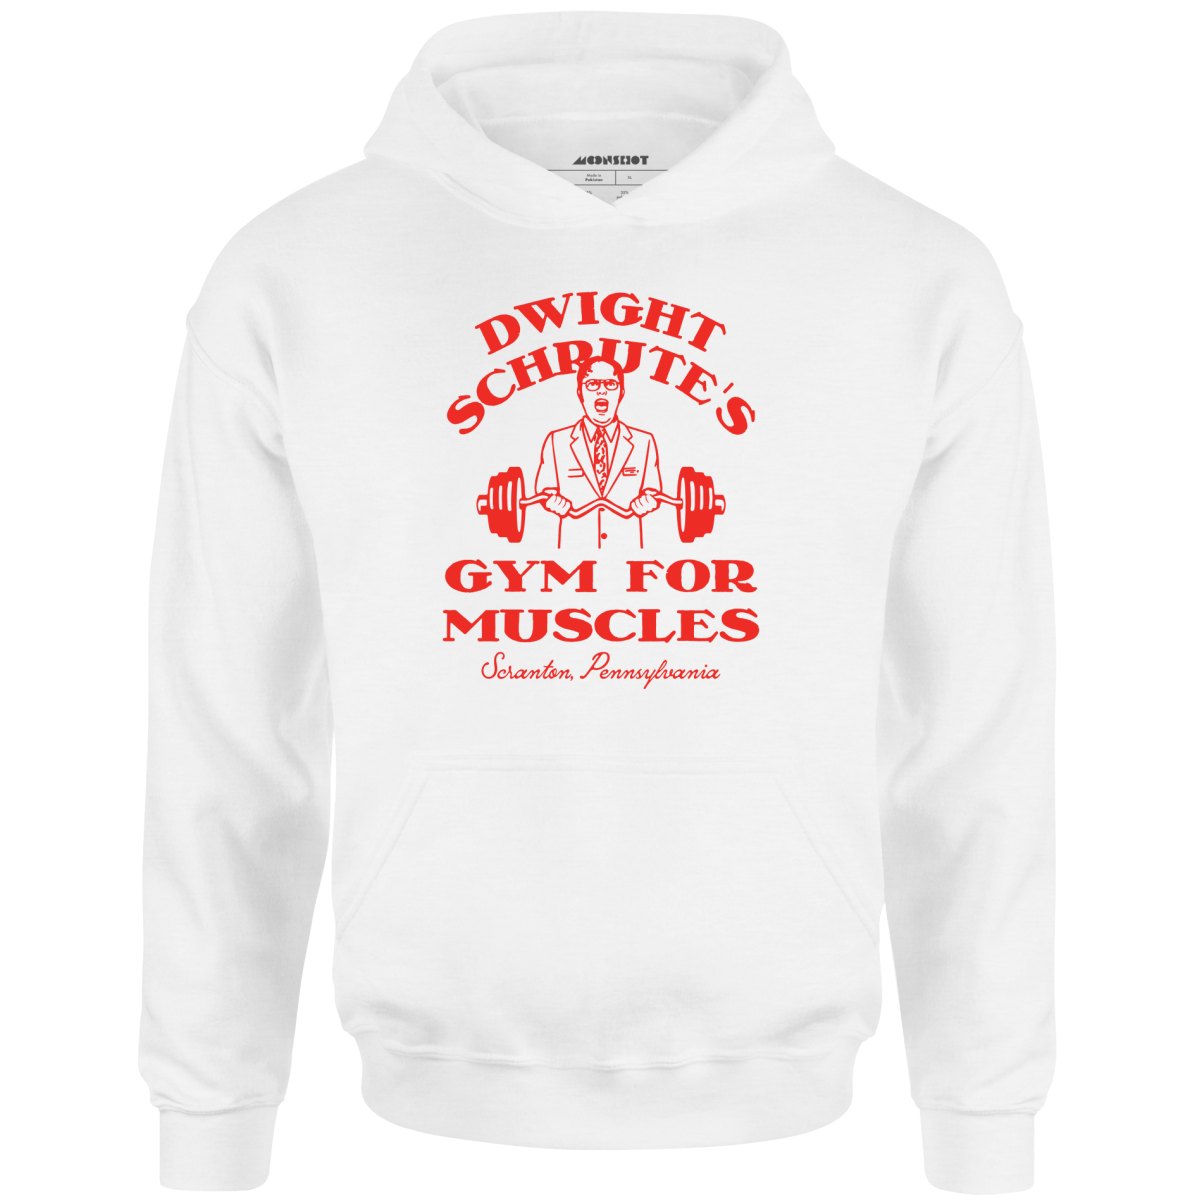 Dwight Schrute's Gym For Muscles - Unisex Hoodie